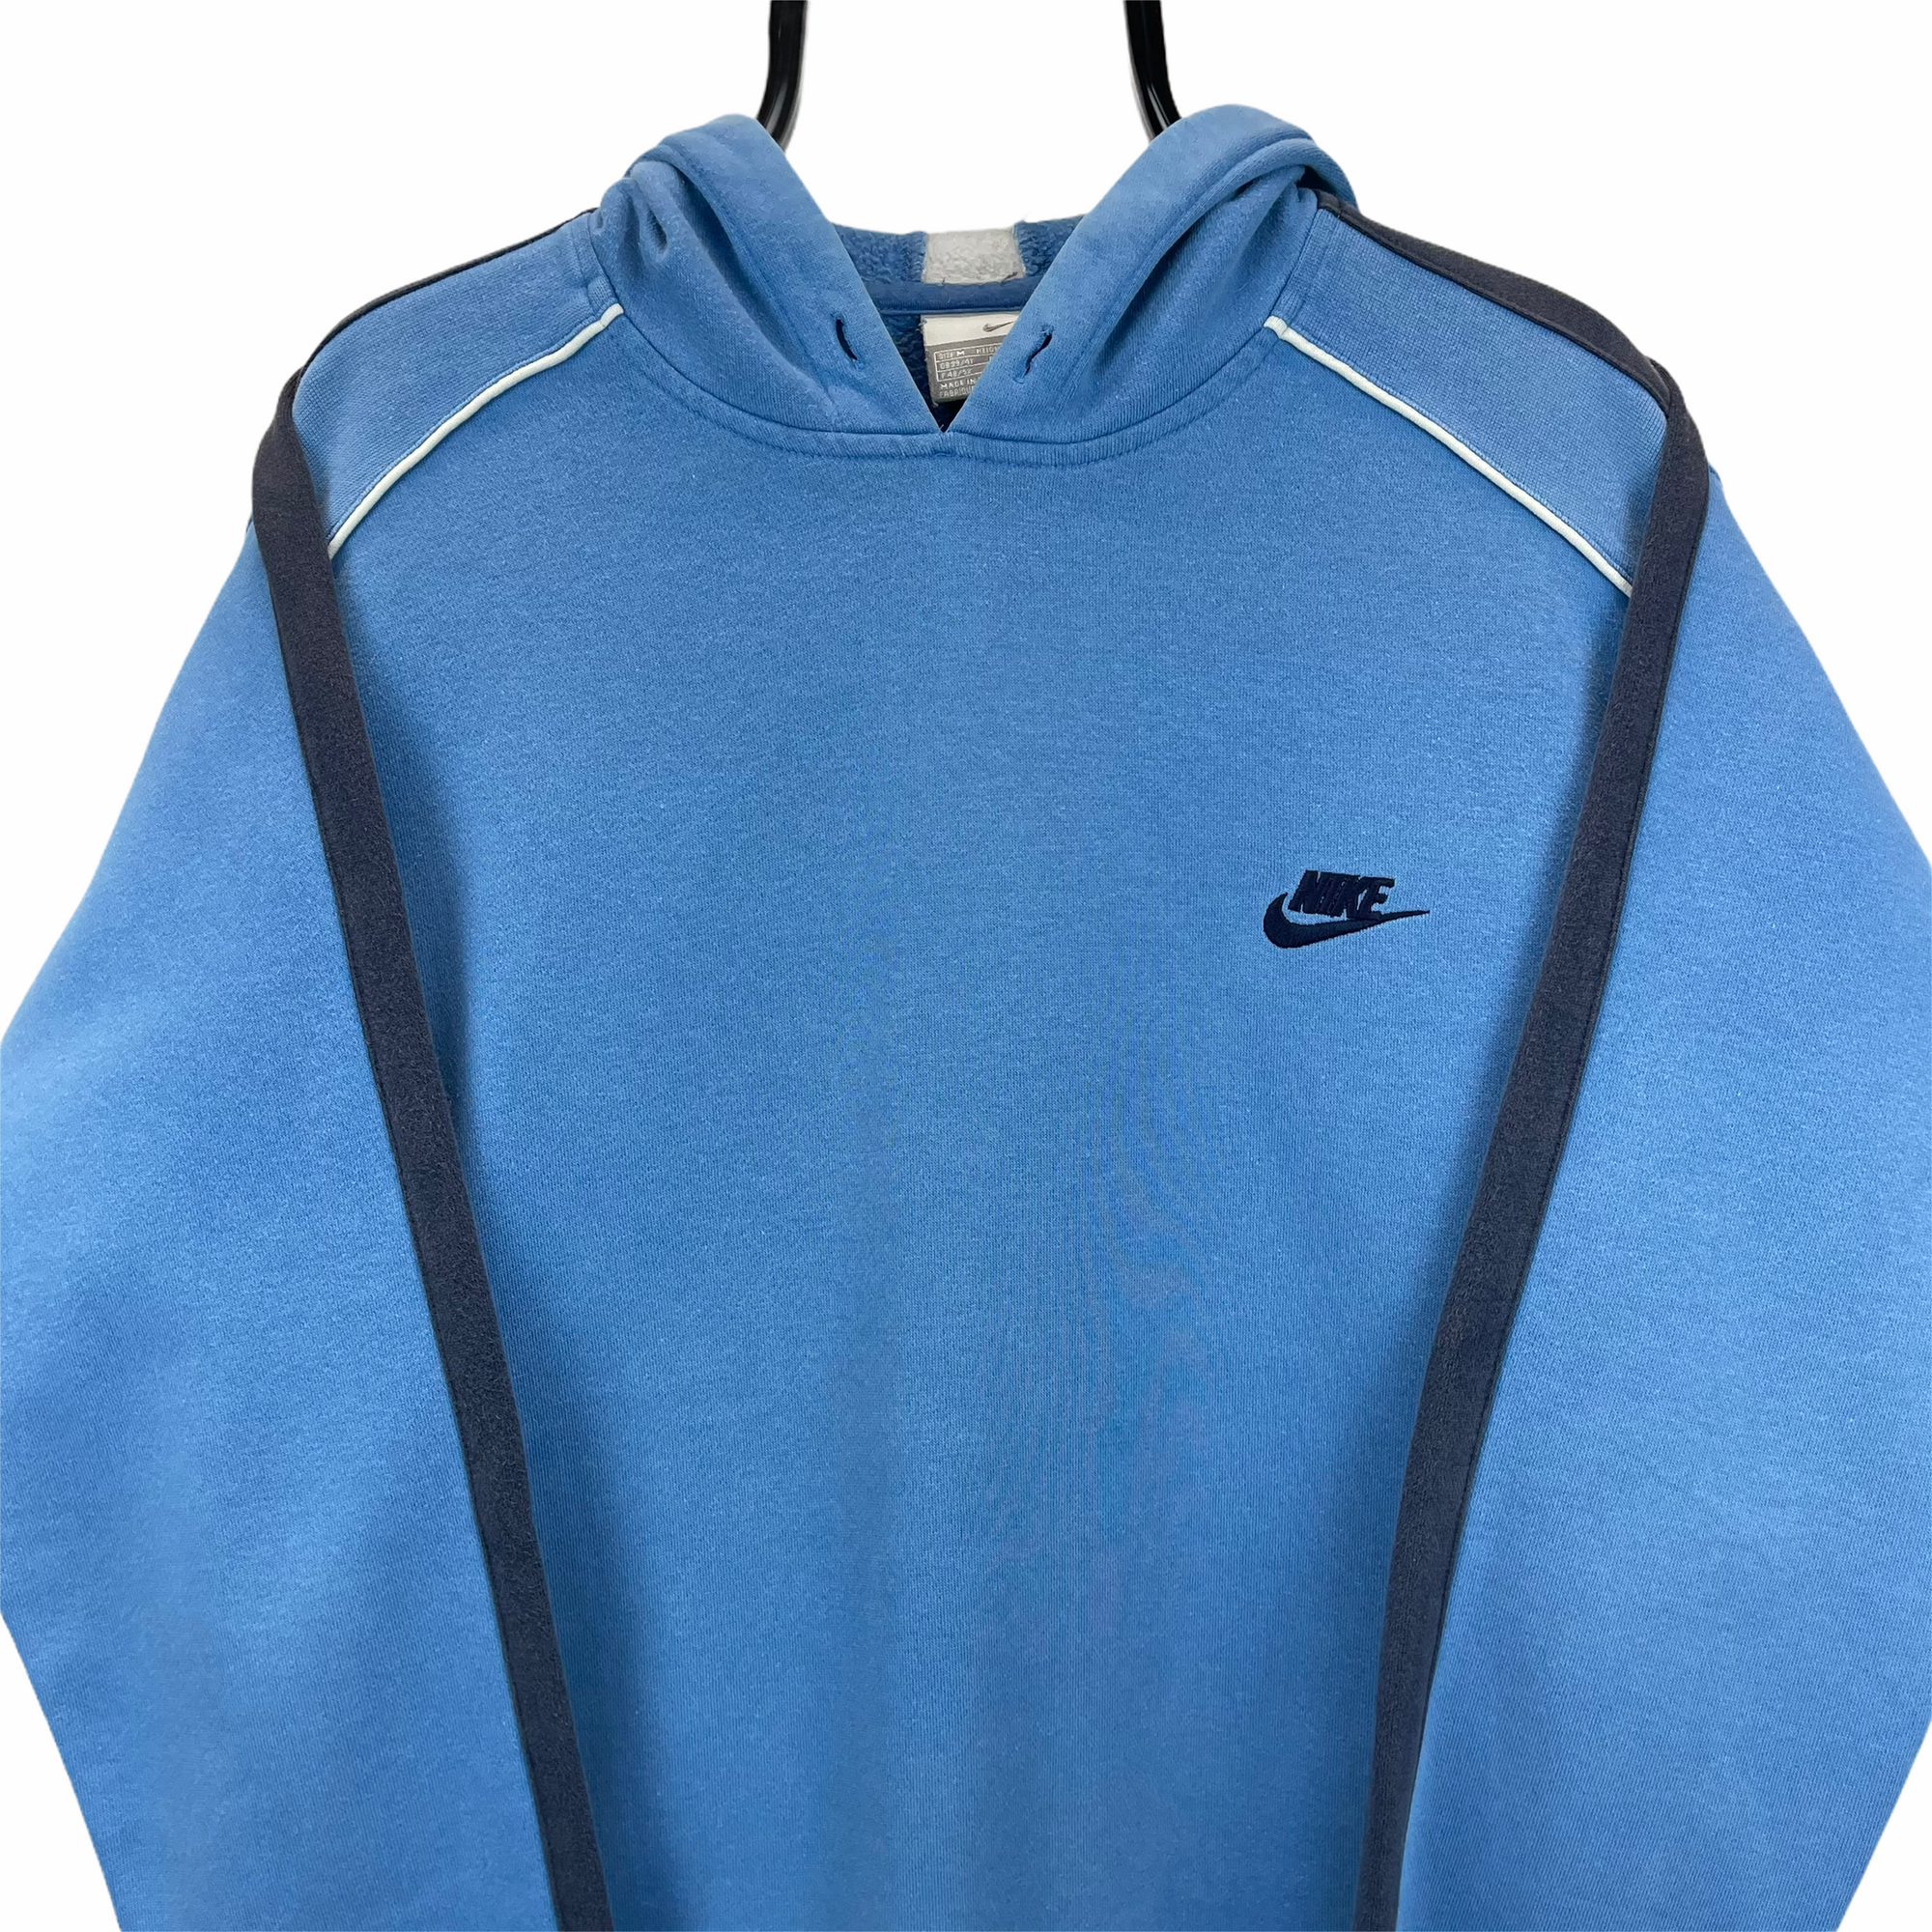 VINTAGE NIKE EMBROIDERED SMALL LOGO HOODIE IN BLUE - MEN'S MEDIUM/WOMEN'S LARGE